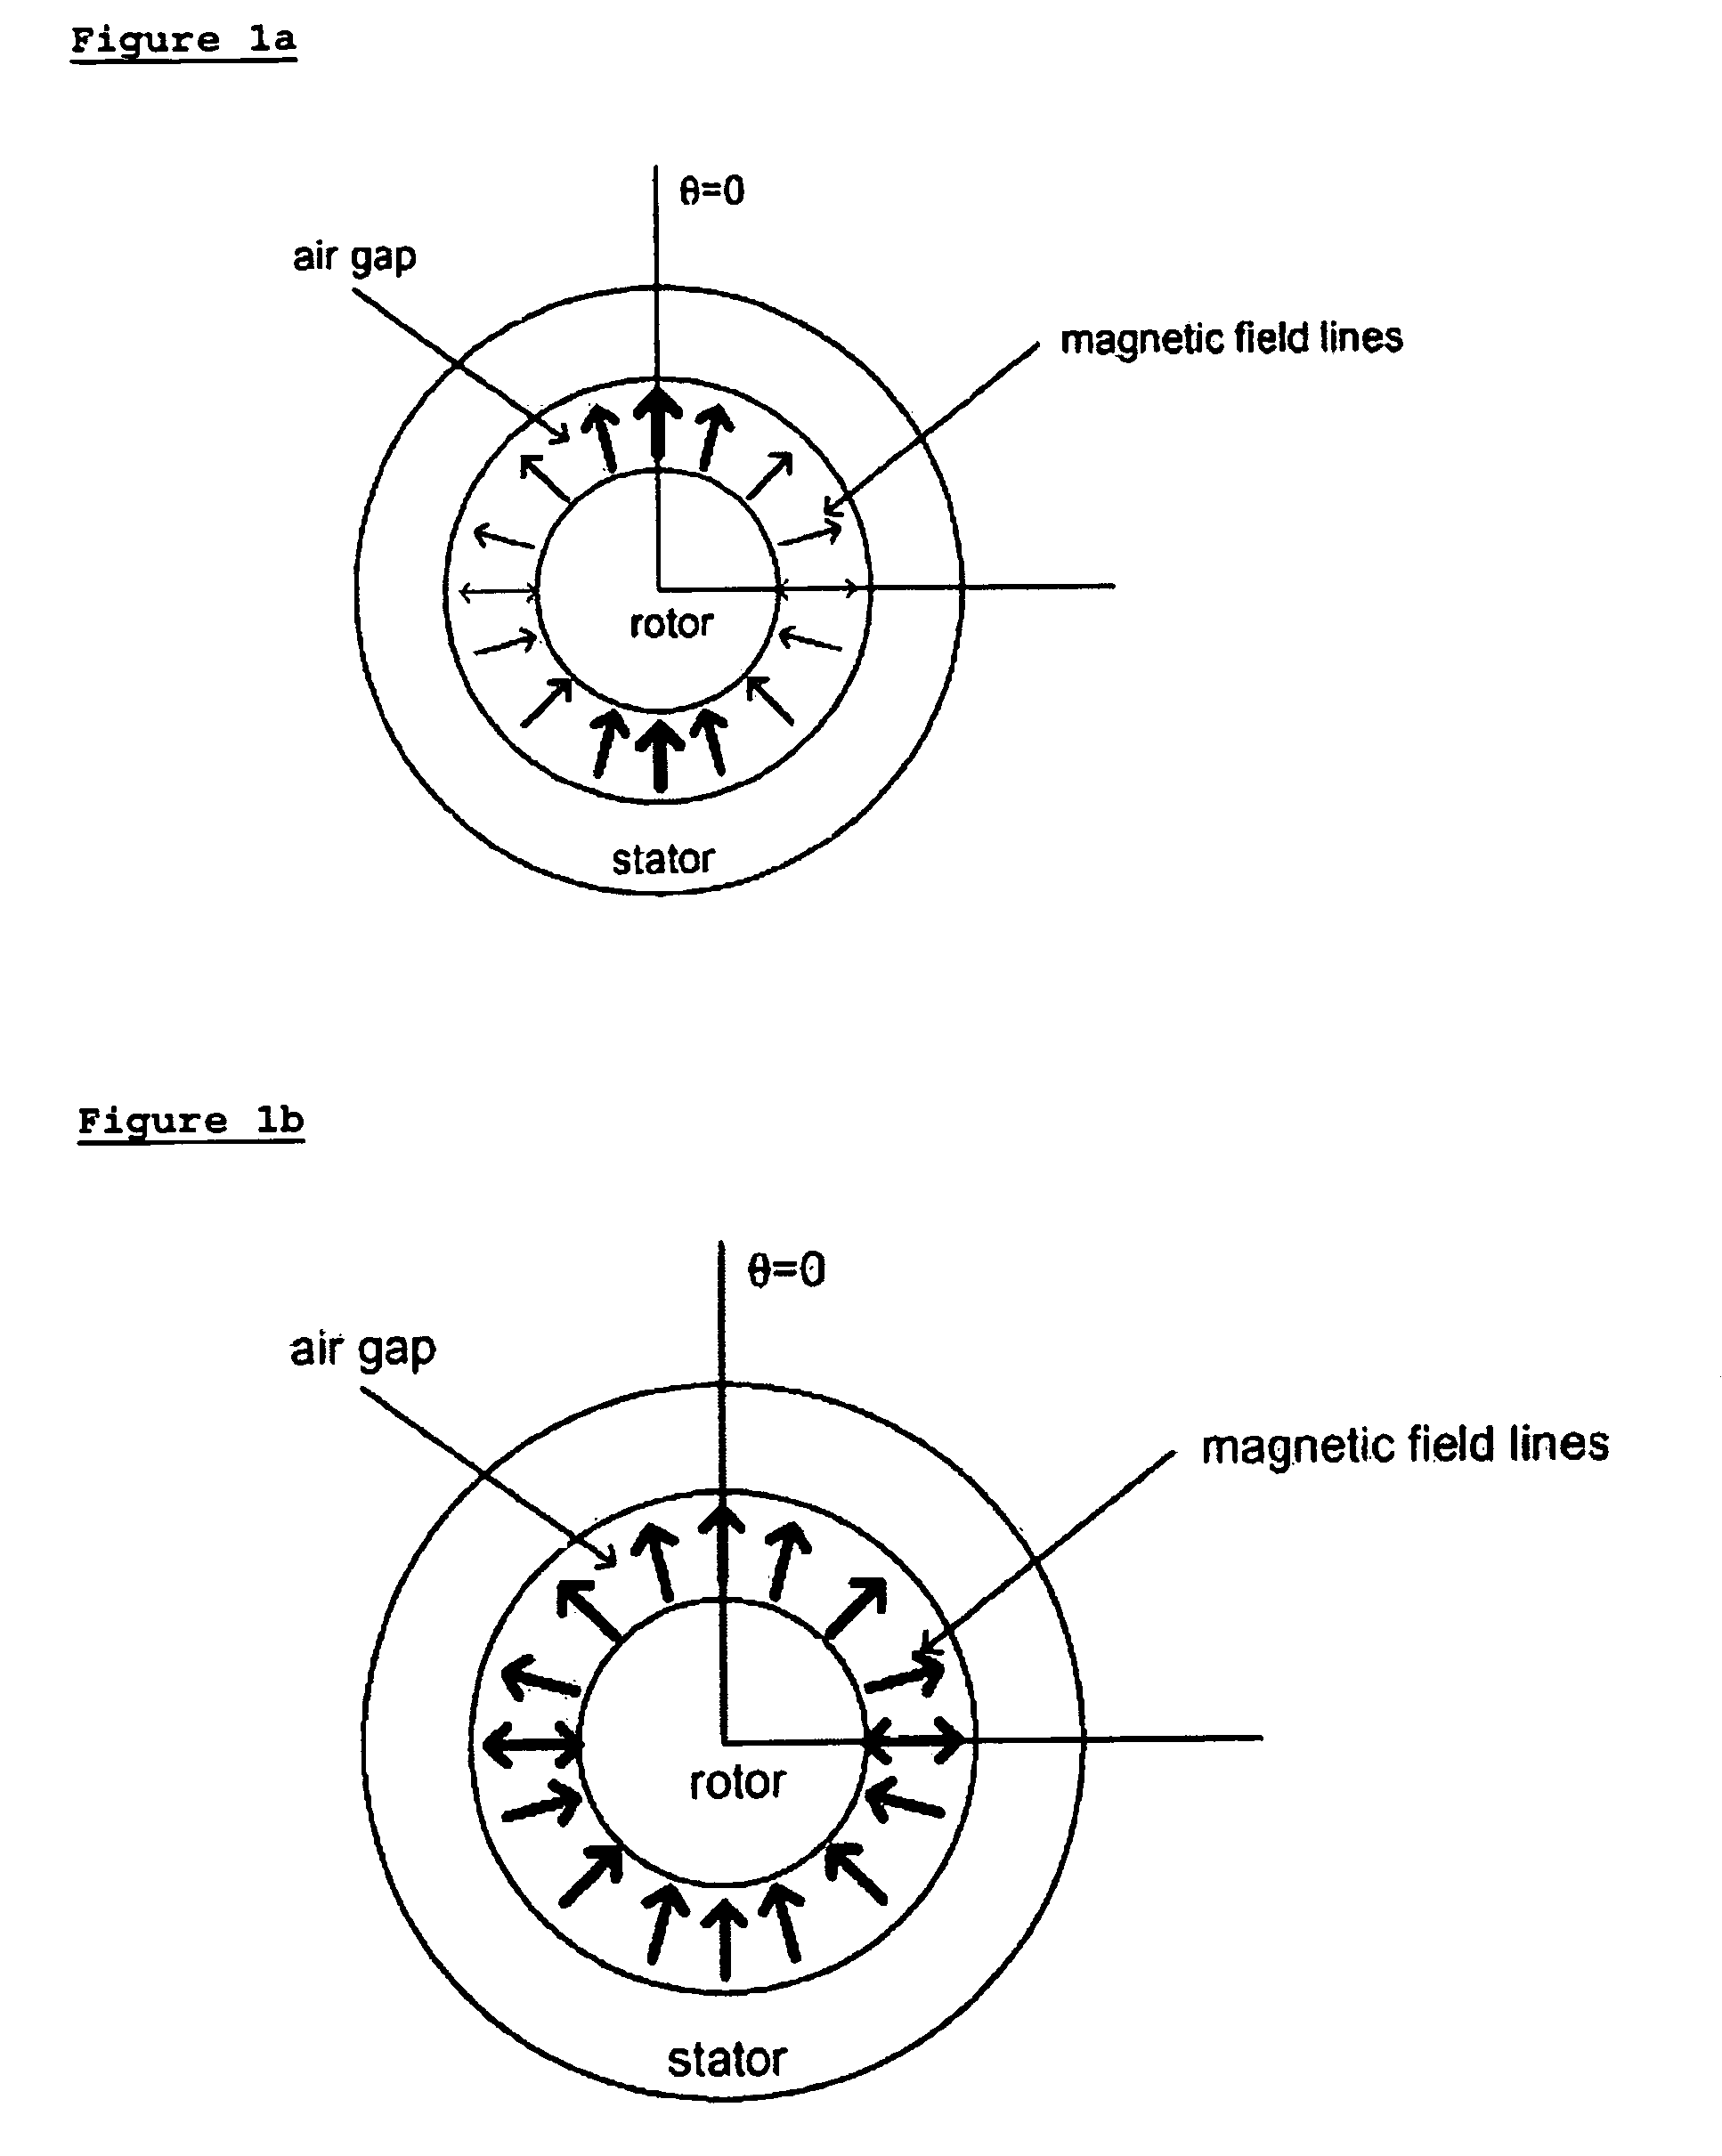 High phase order electrical rotating machine with distributed windings